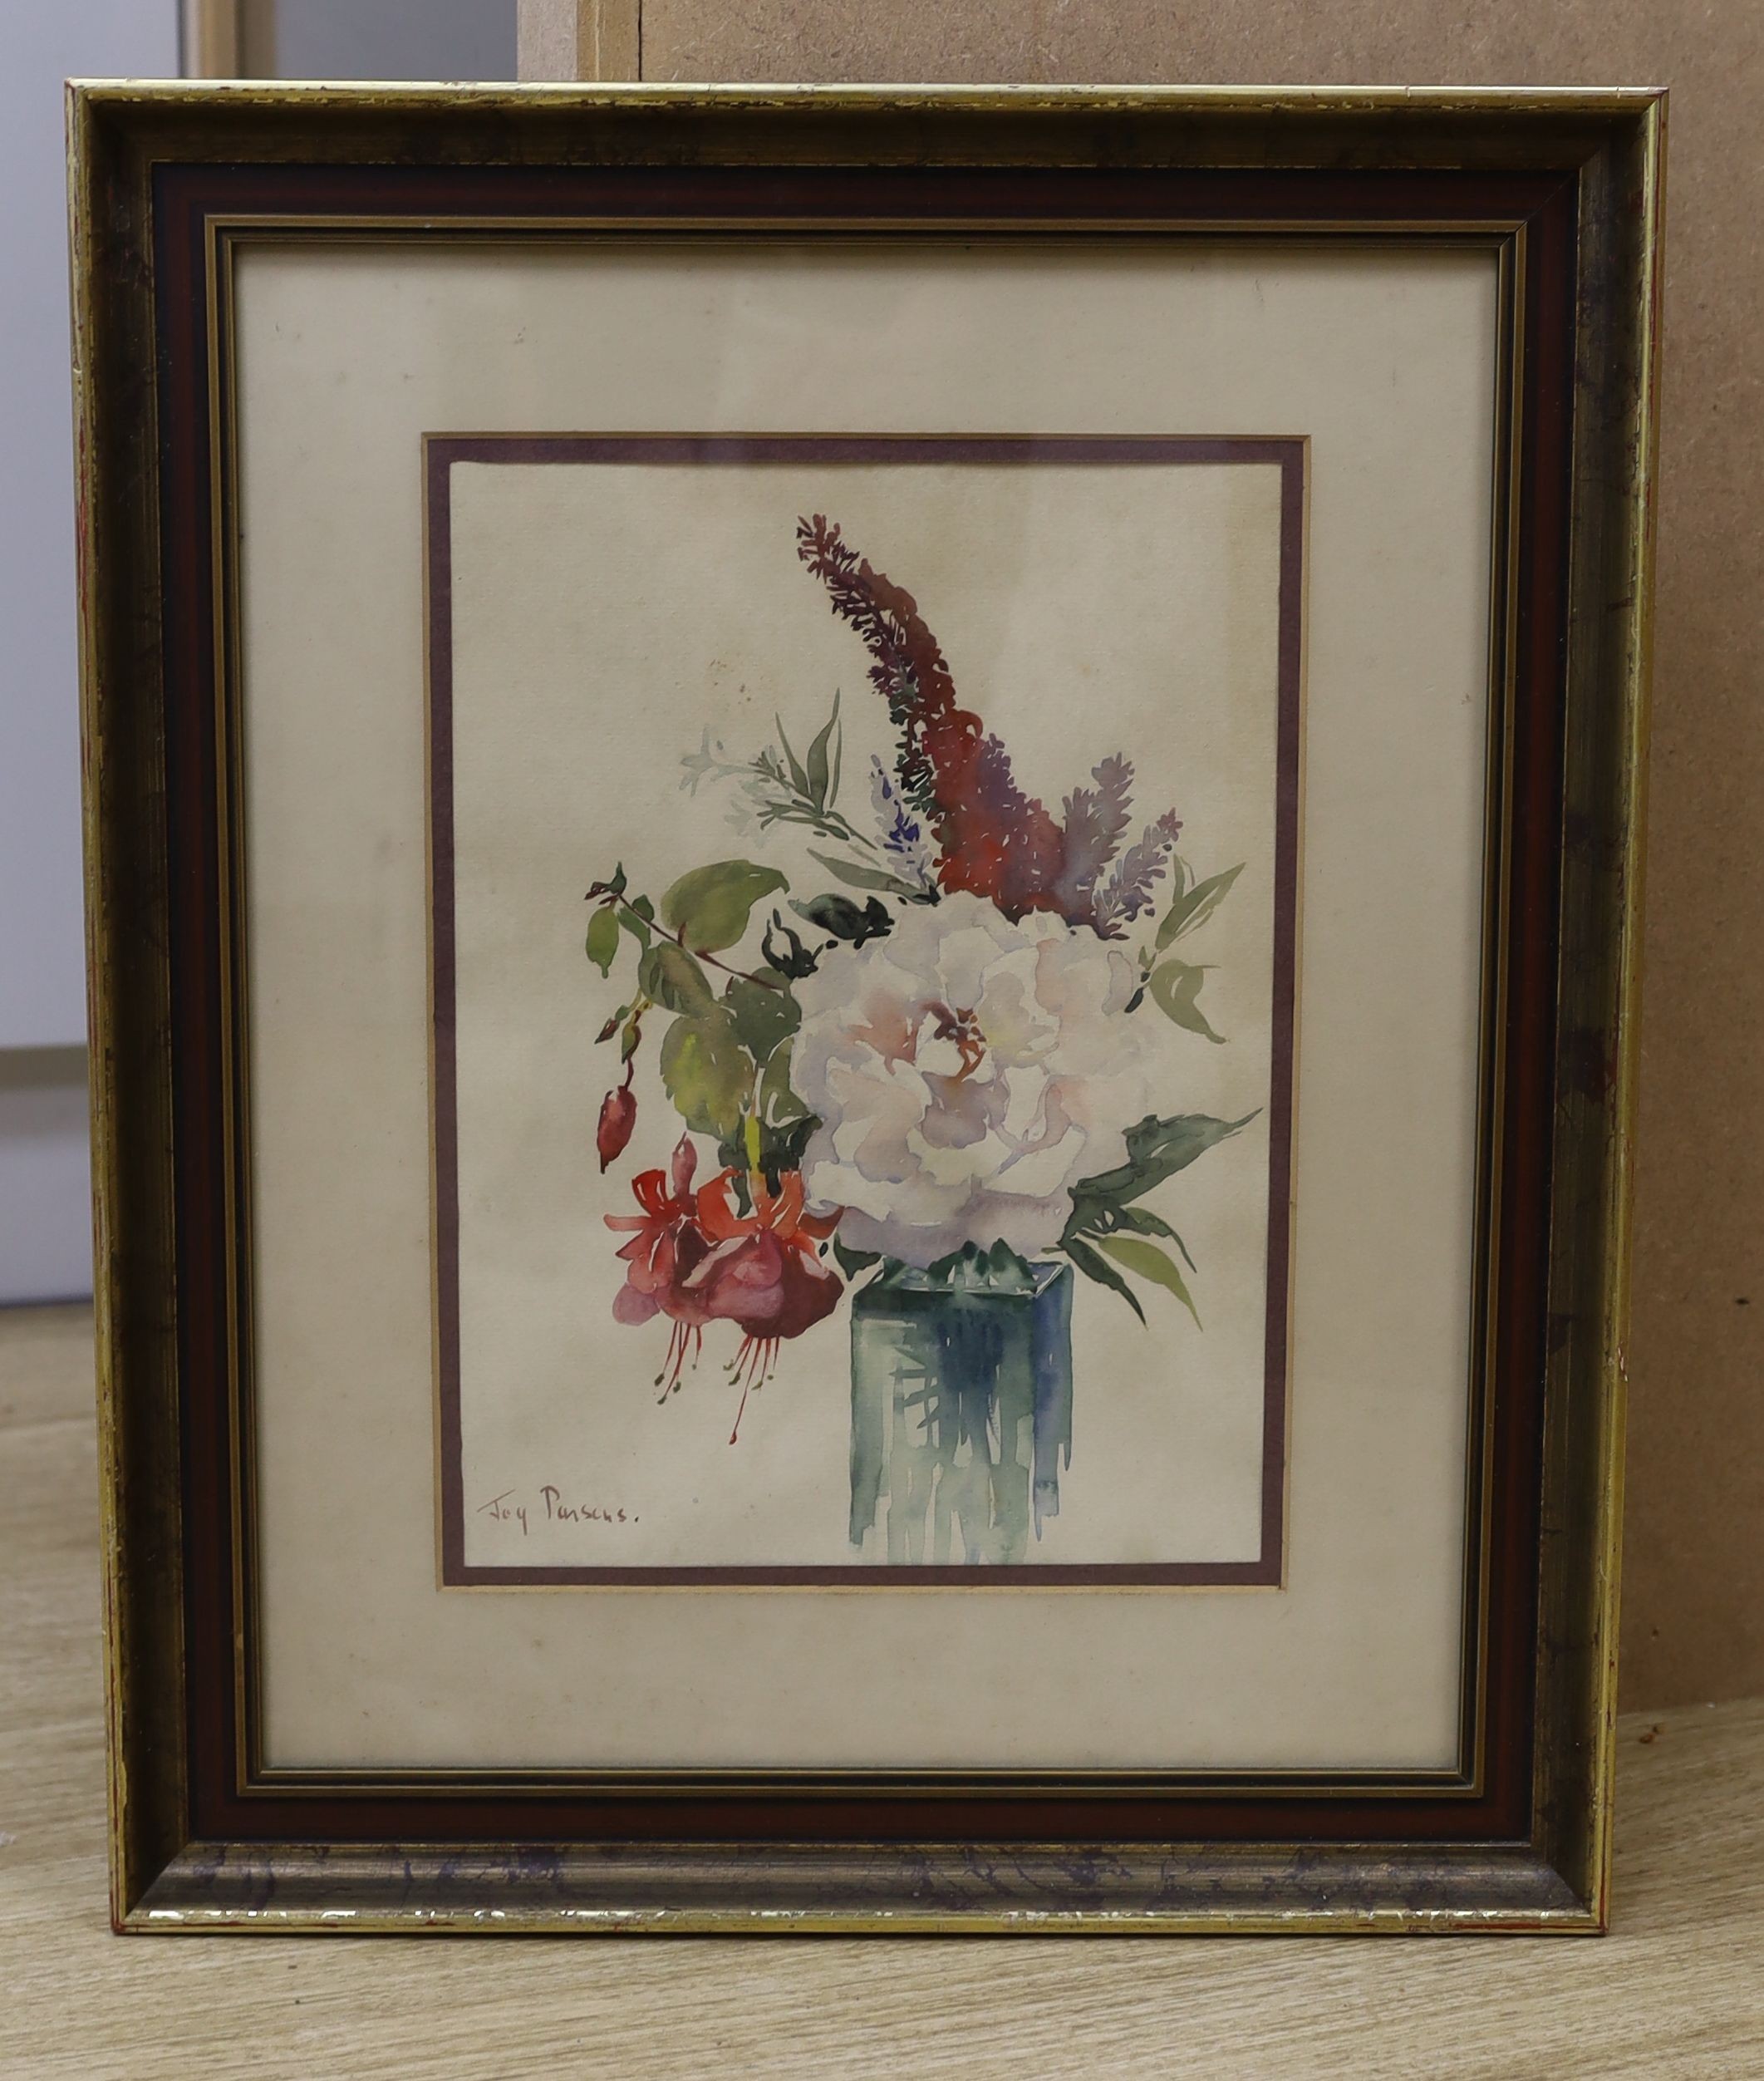 Joy Parsons, watercolour, Still life of flowers in a glass vase, signed, 34 x 25cm